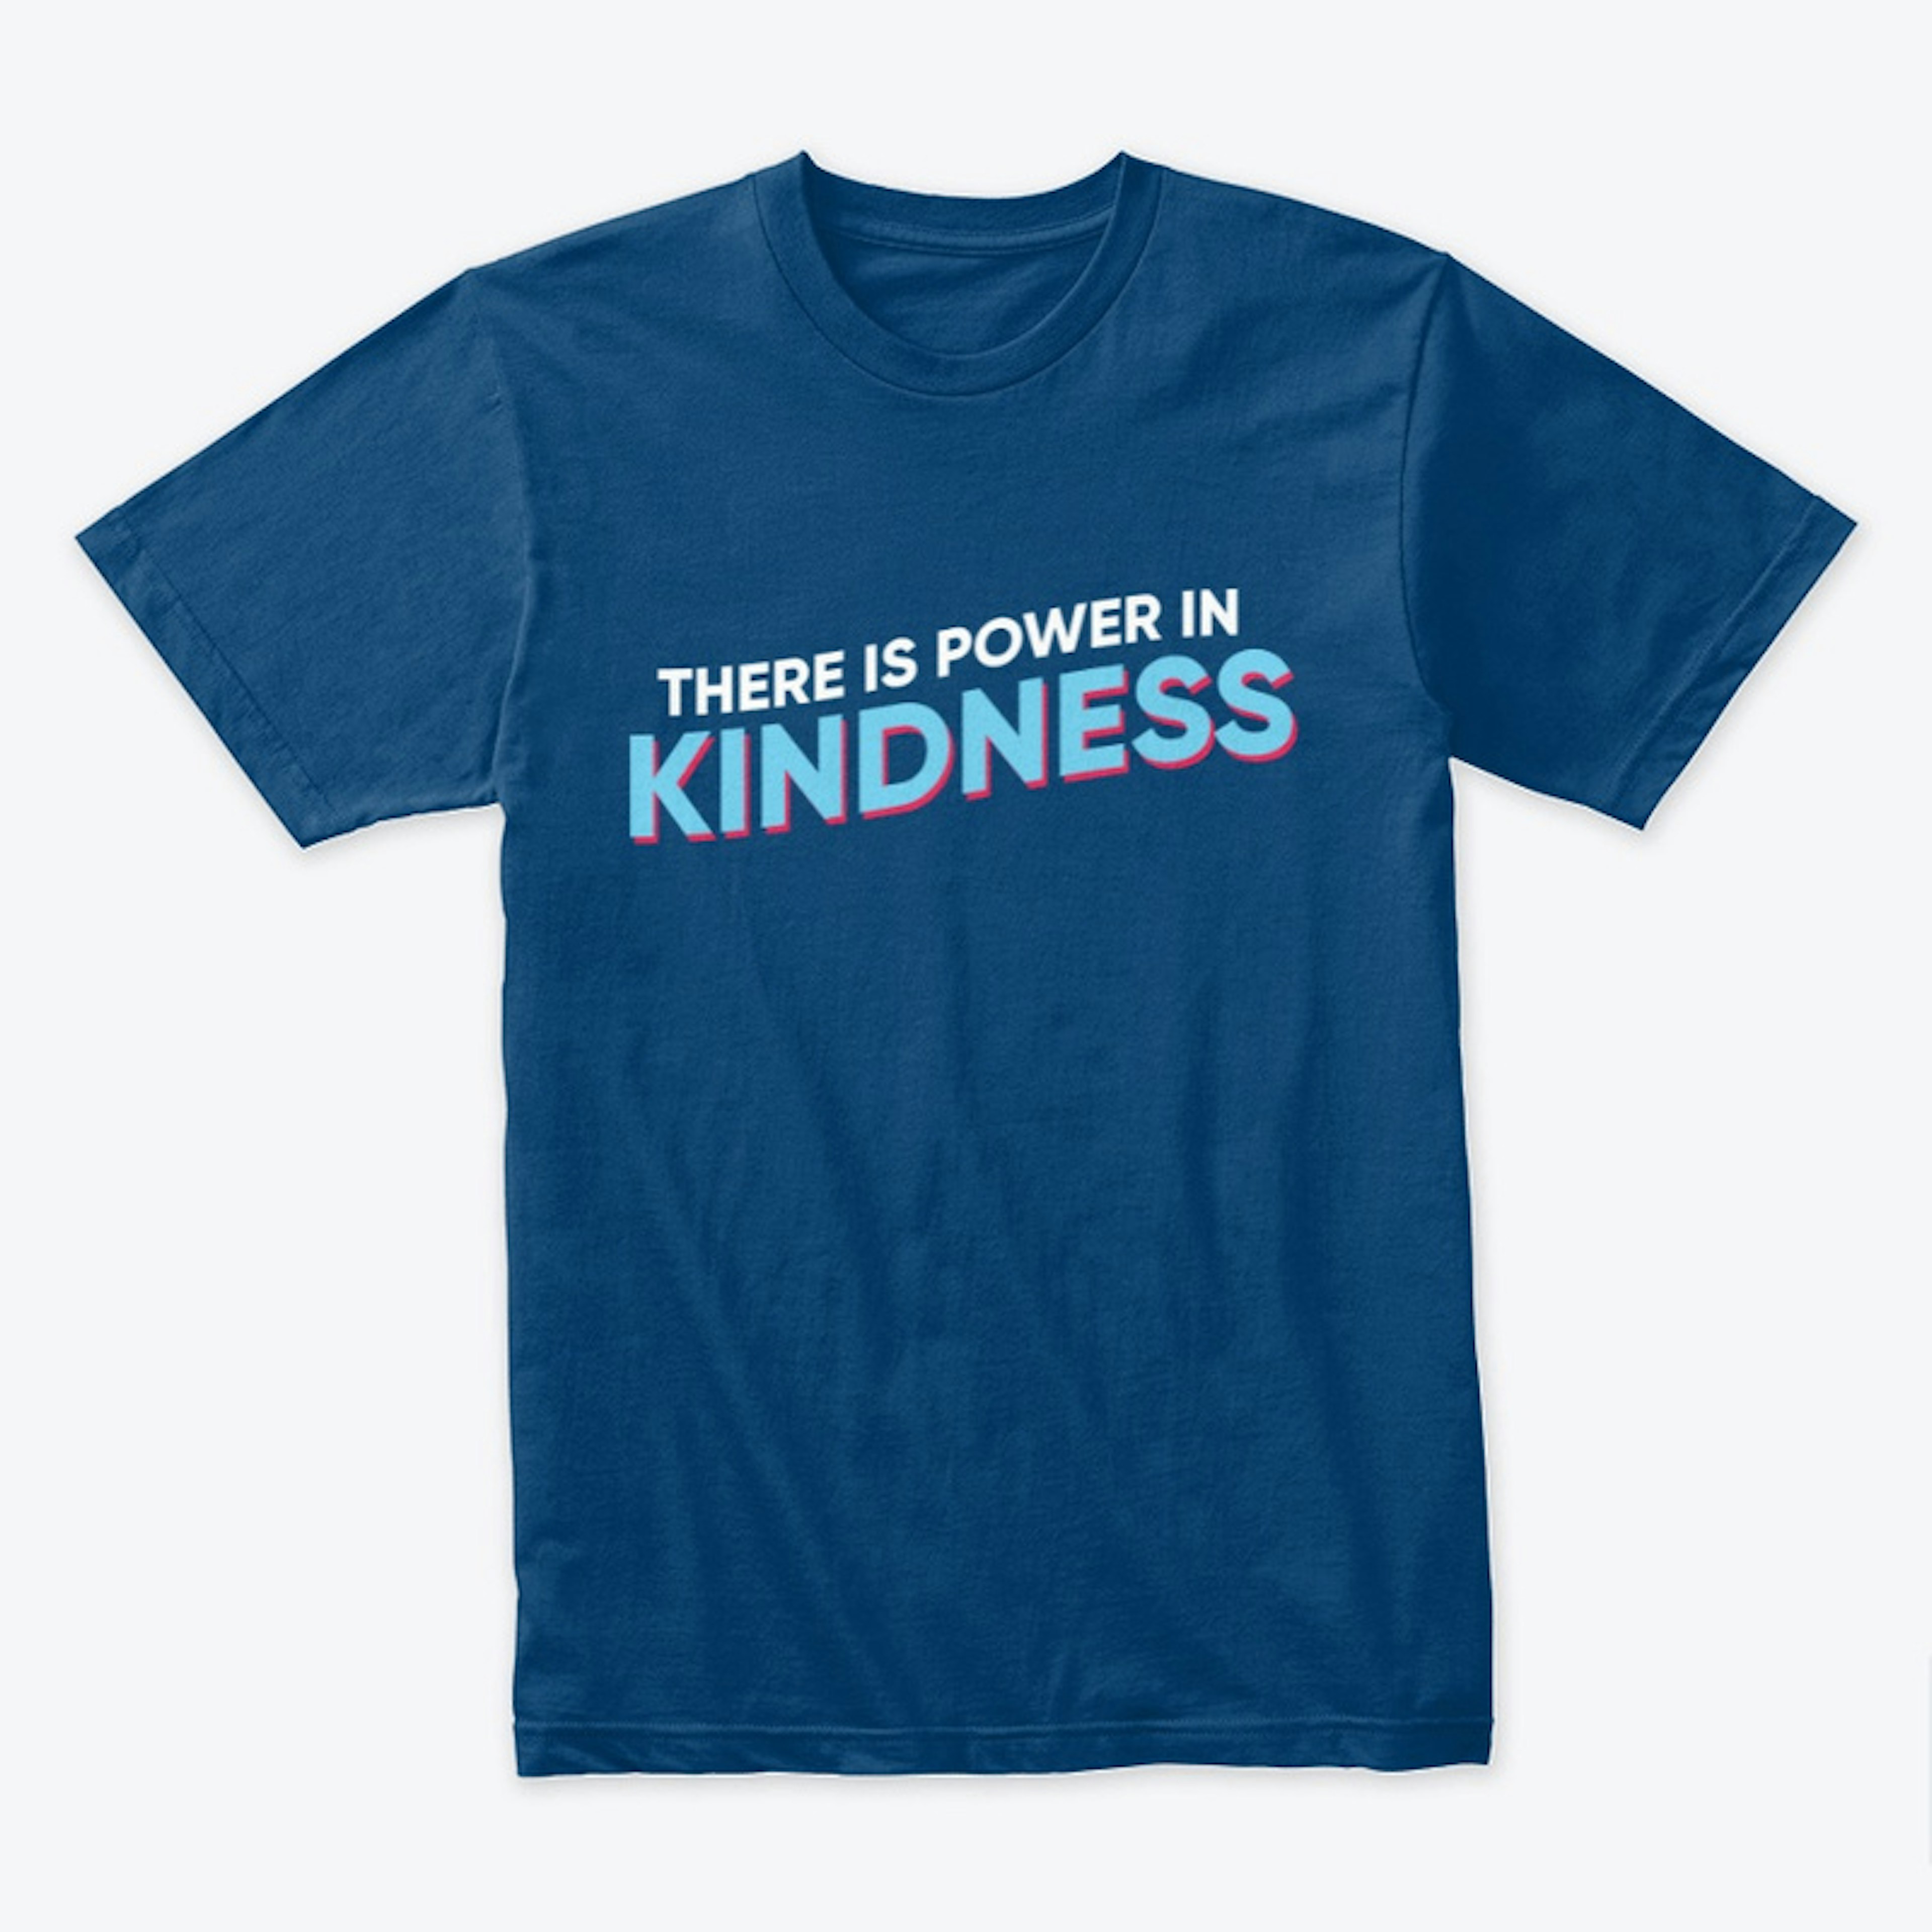 There is Power in Kindness